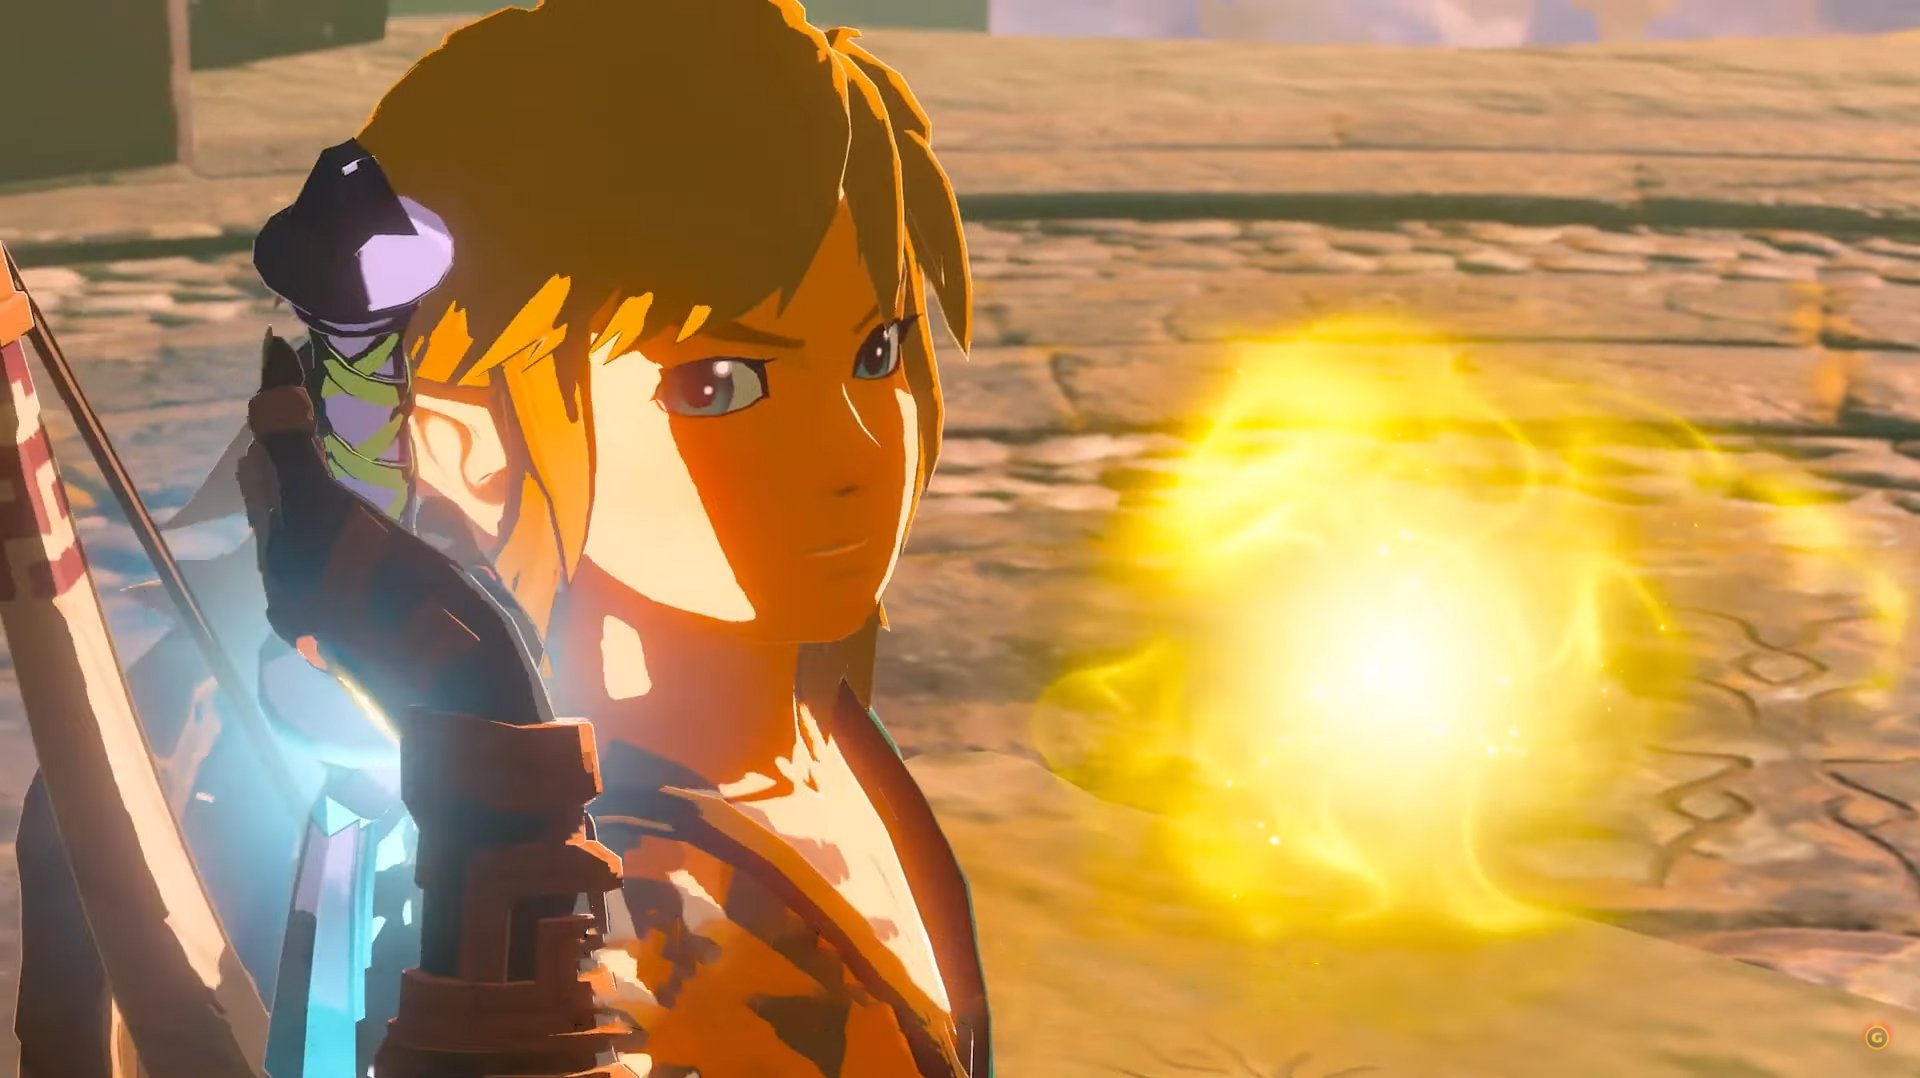 Zelda BOTW 2 Now Has Totally New Name, Release Date And Trailer